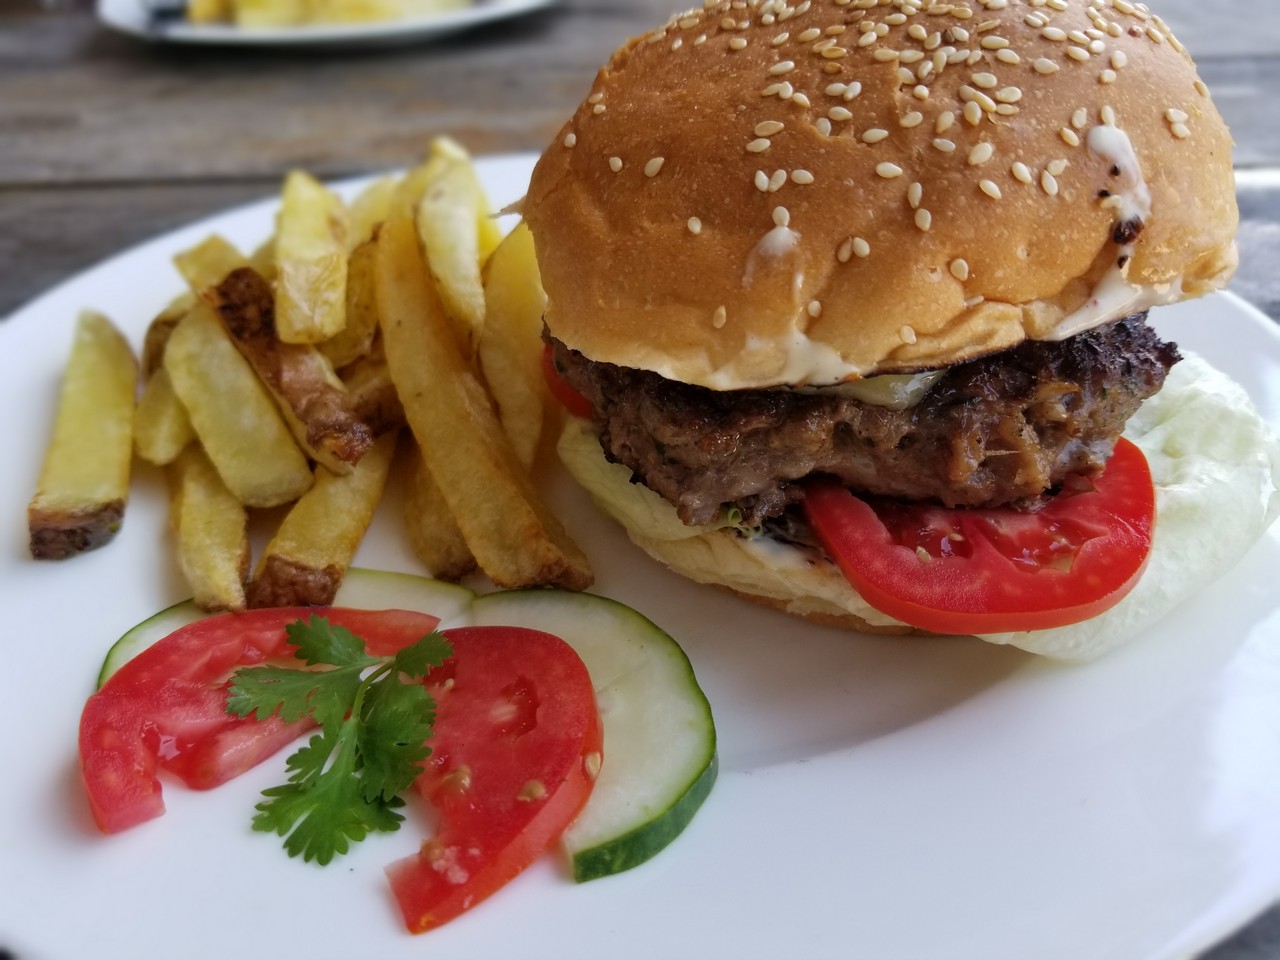 a burger and fries on a plate